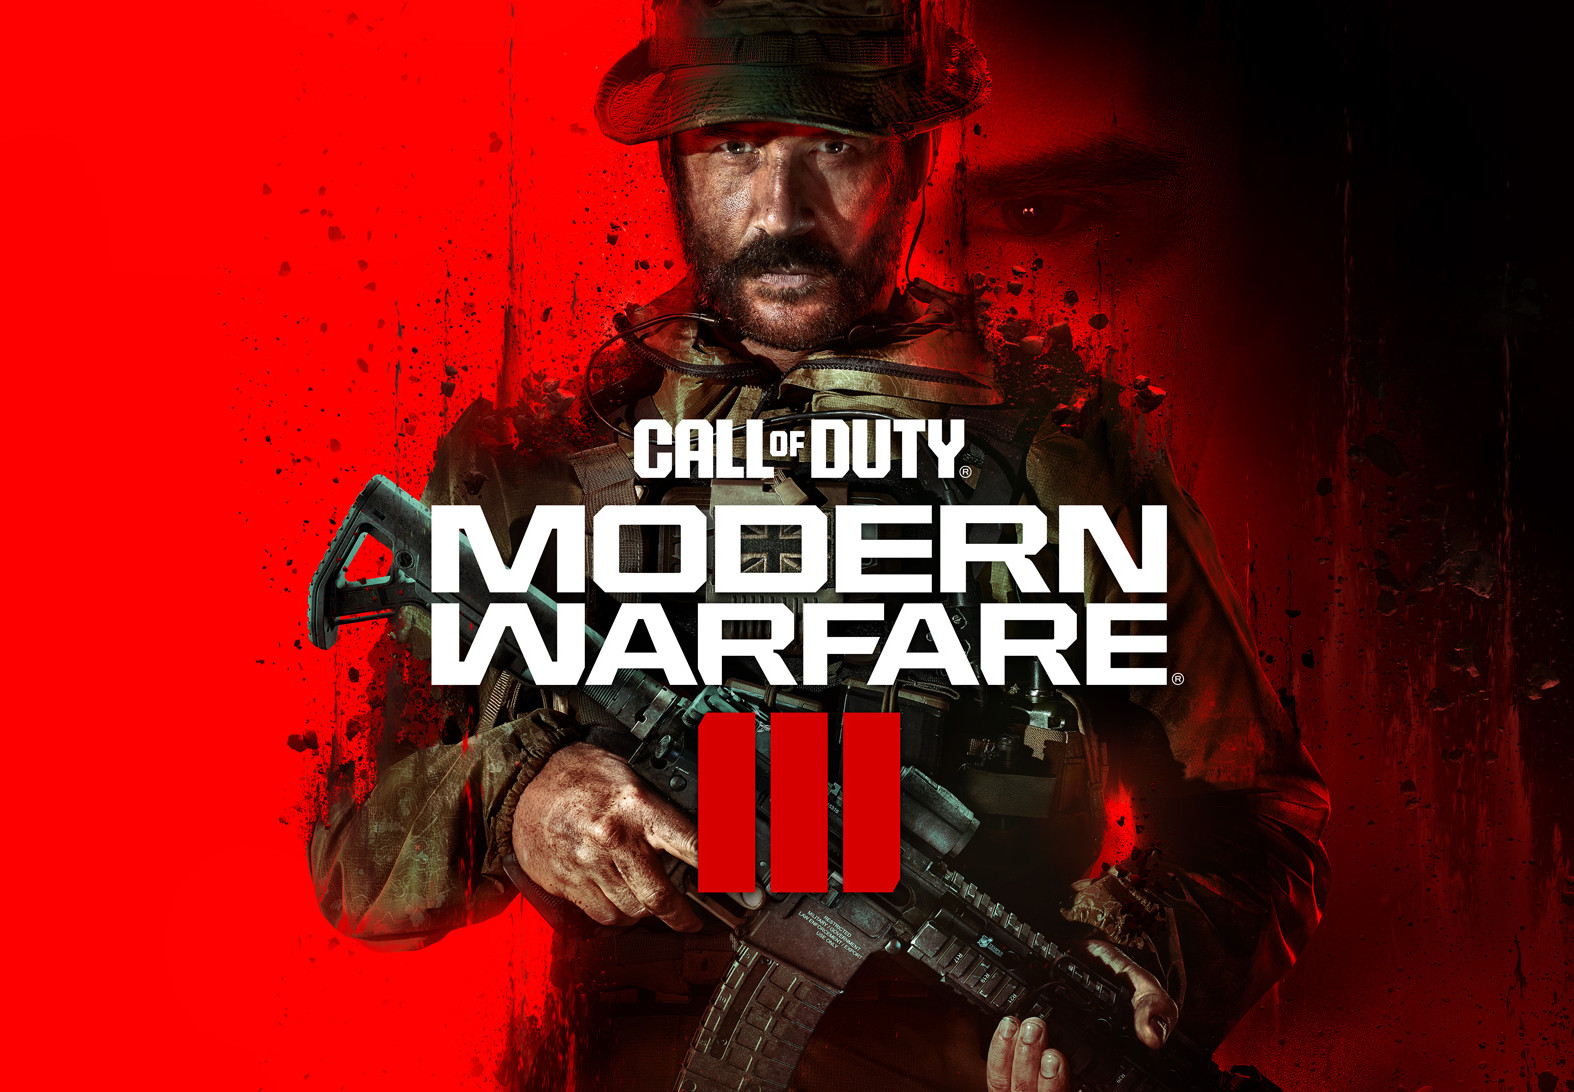 Call Of Duty: Modern Warfare III - Caught In The Crosshair Weapon Vinyl PC/PS4/PS5/XBOX One/Series X,S CD Key